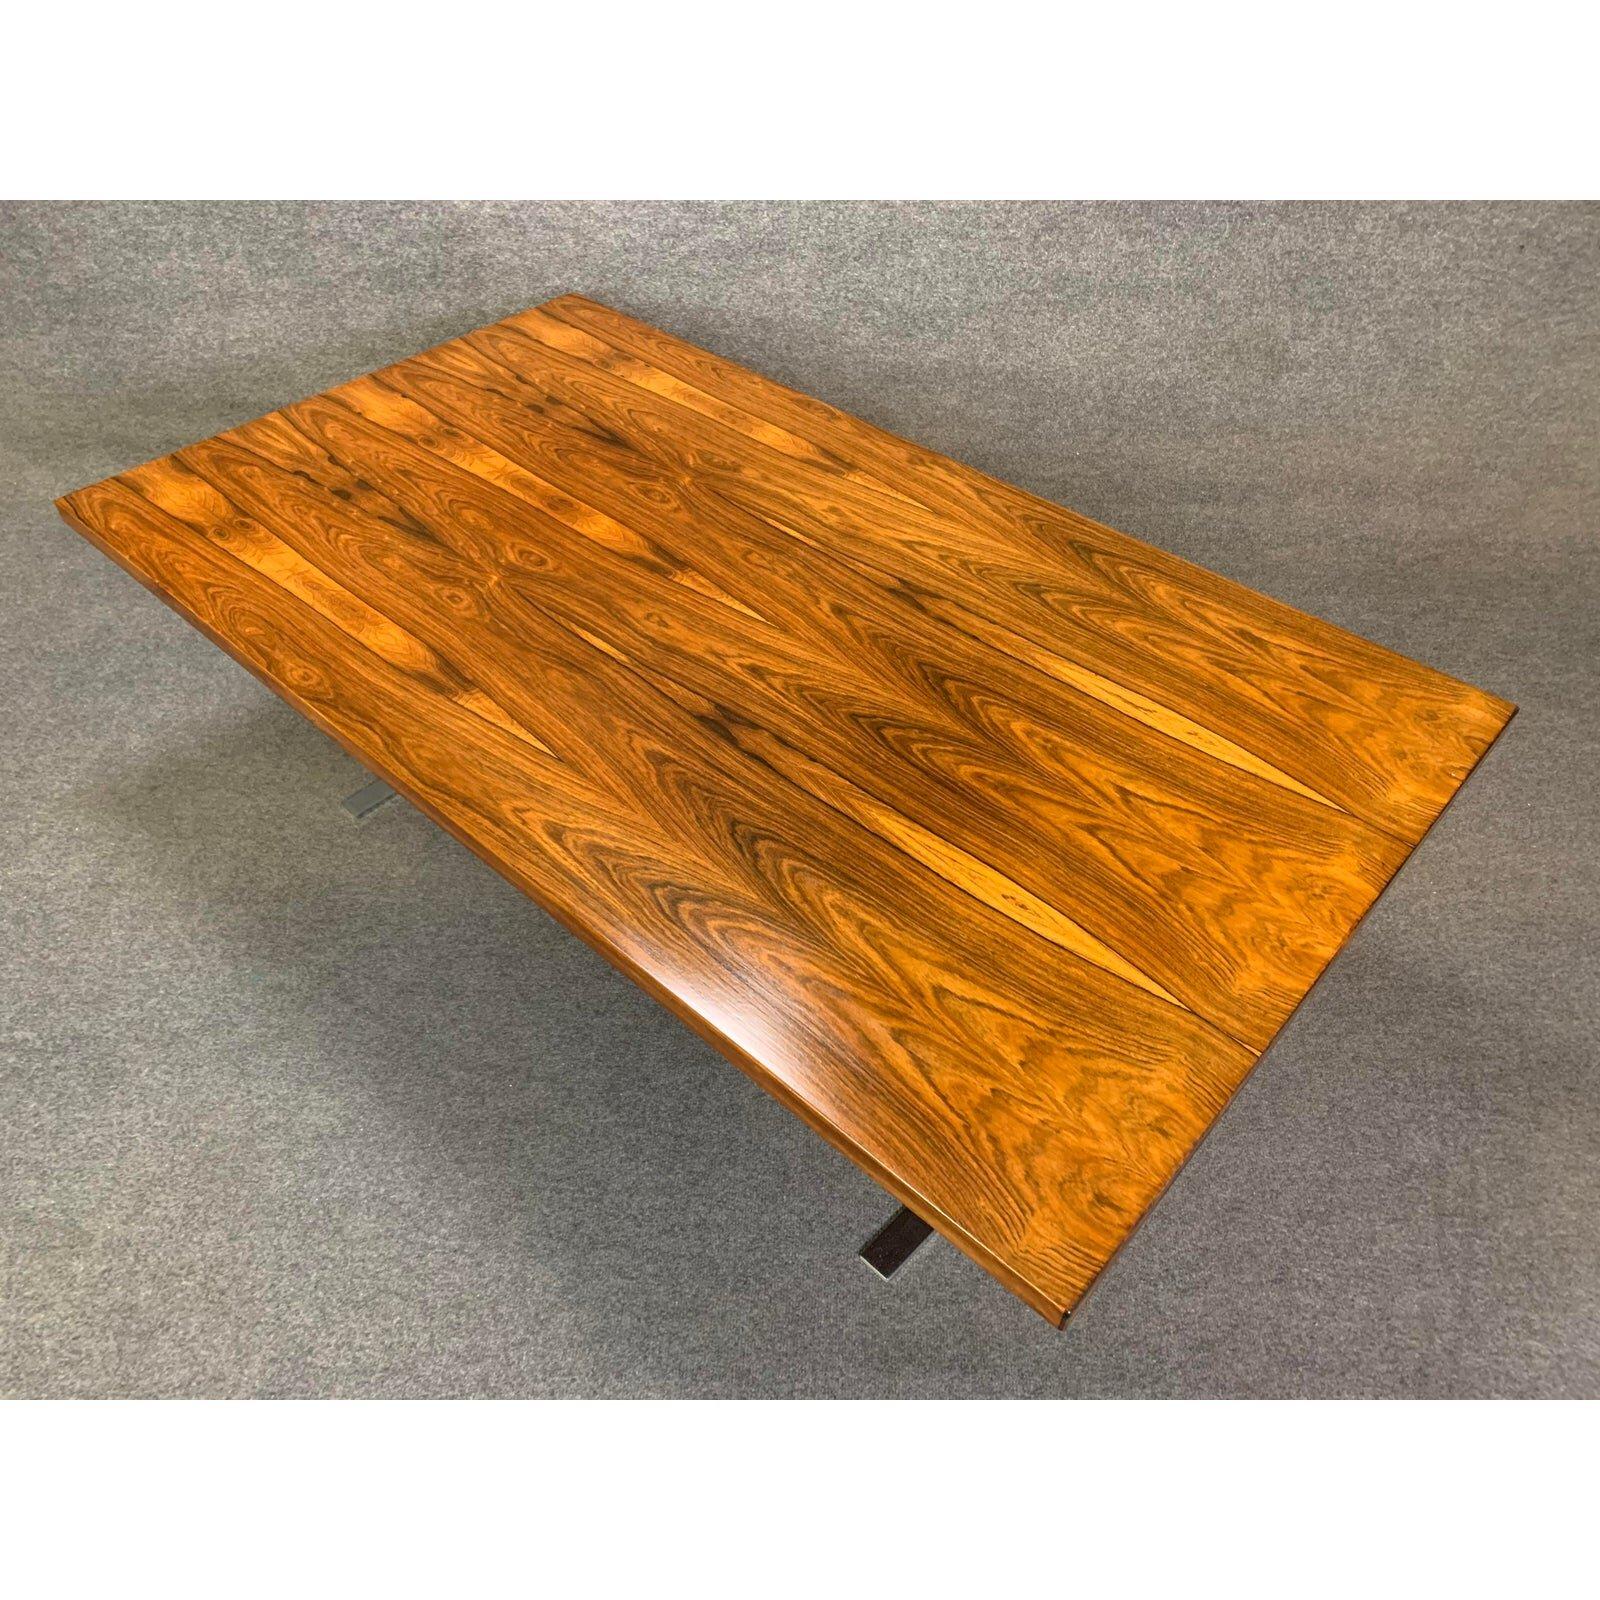 Vintage Danish Mid-Century Modern Rosewood and Chrome Large Coffee Table For Sale 1